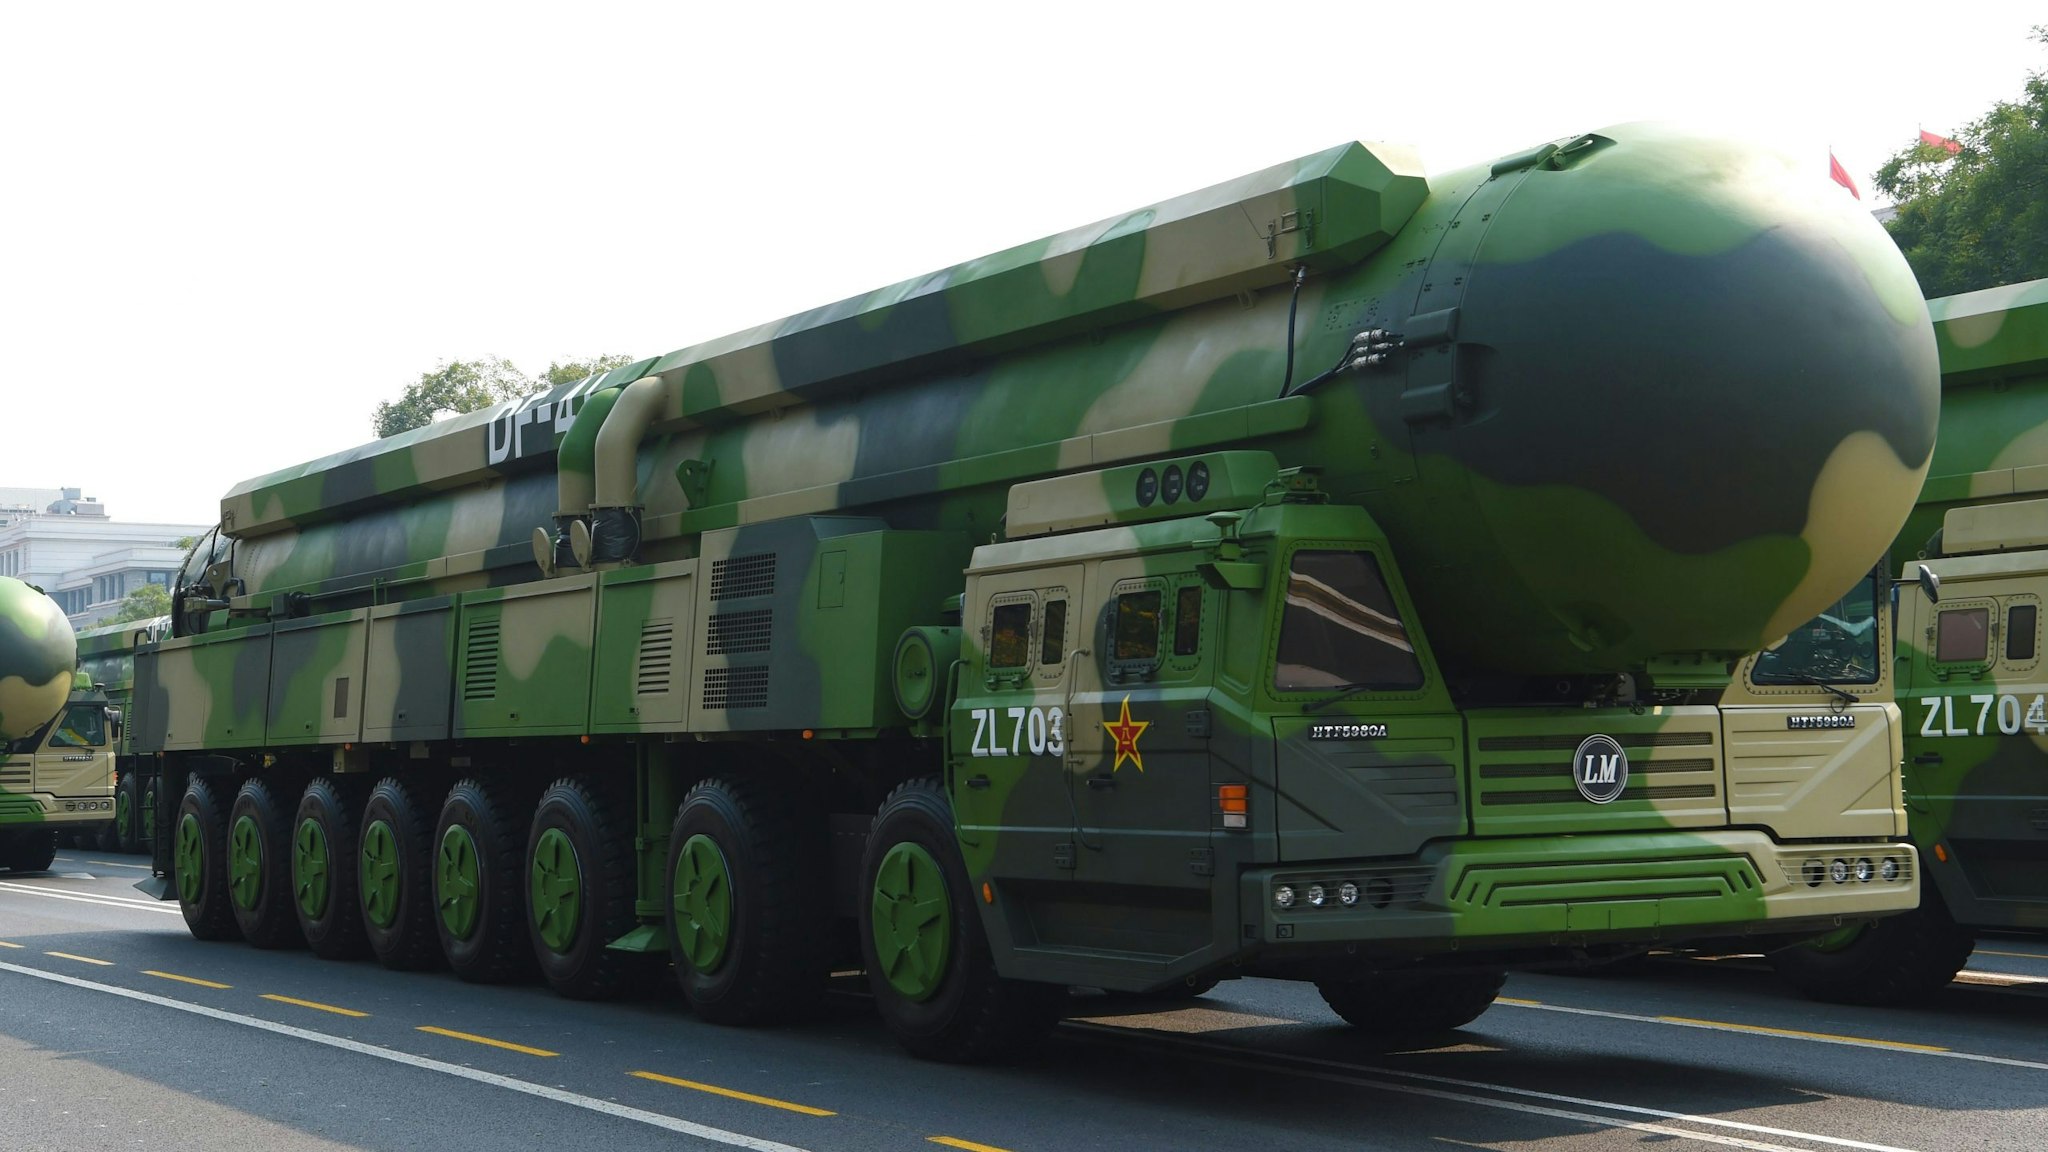 BEIJING, Oct. 1, 2019 -- The formation of Dongfeng-41 nuclear missiles takes part in a military parade celebrating the 70th anniversary of the founding of the People's Republic of China in Beijing, capital of China, Oct. 1, 2019.